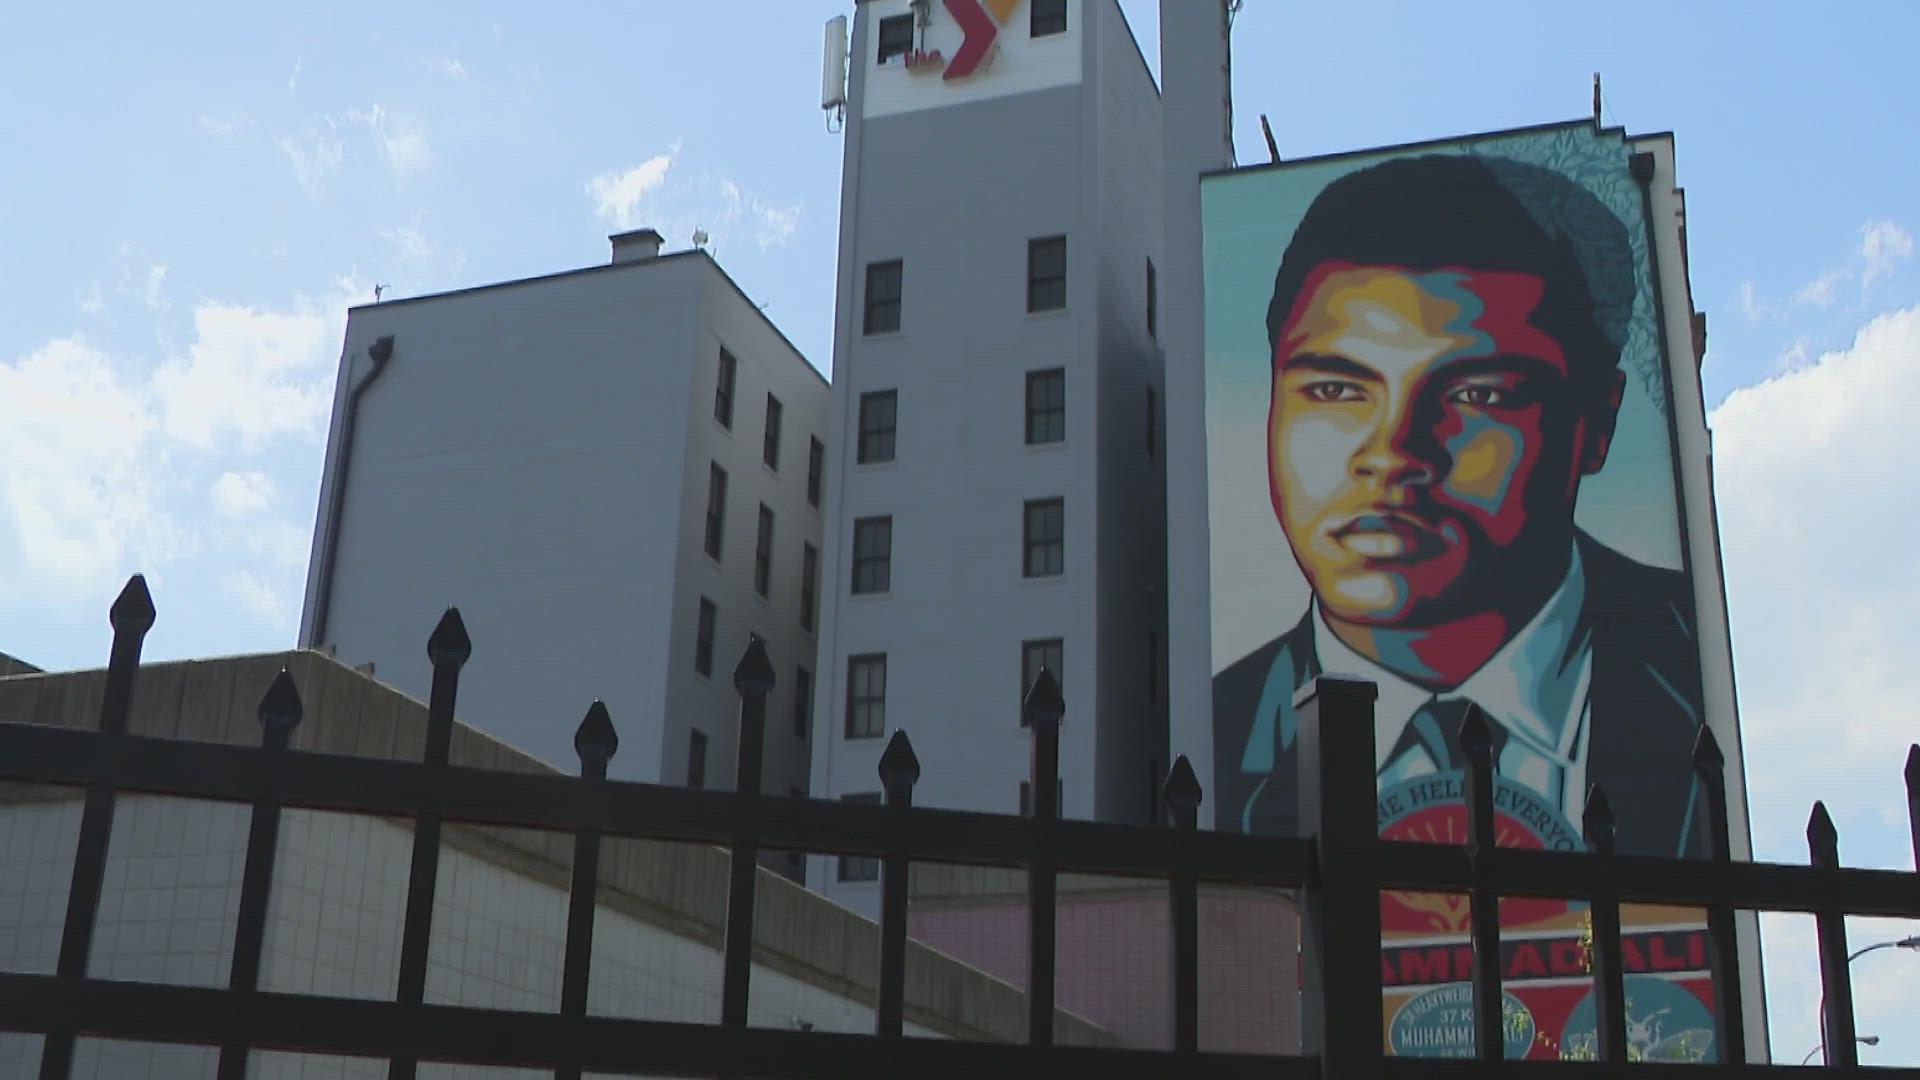 Artist Shepard Fairey painted the seven-story mural. He also designed the "Hope" poster for Barack Obama when he was running for president.